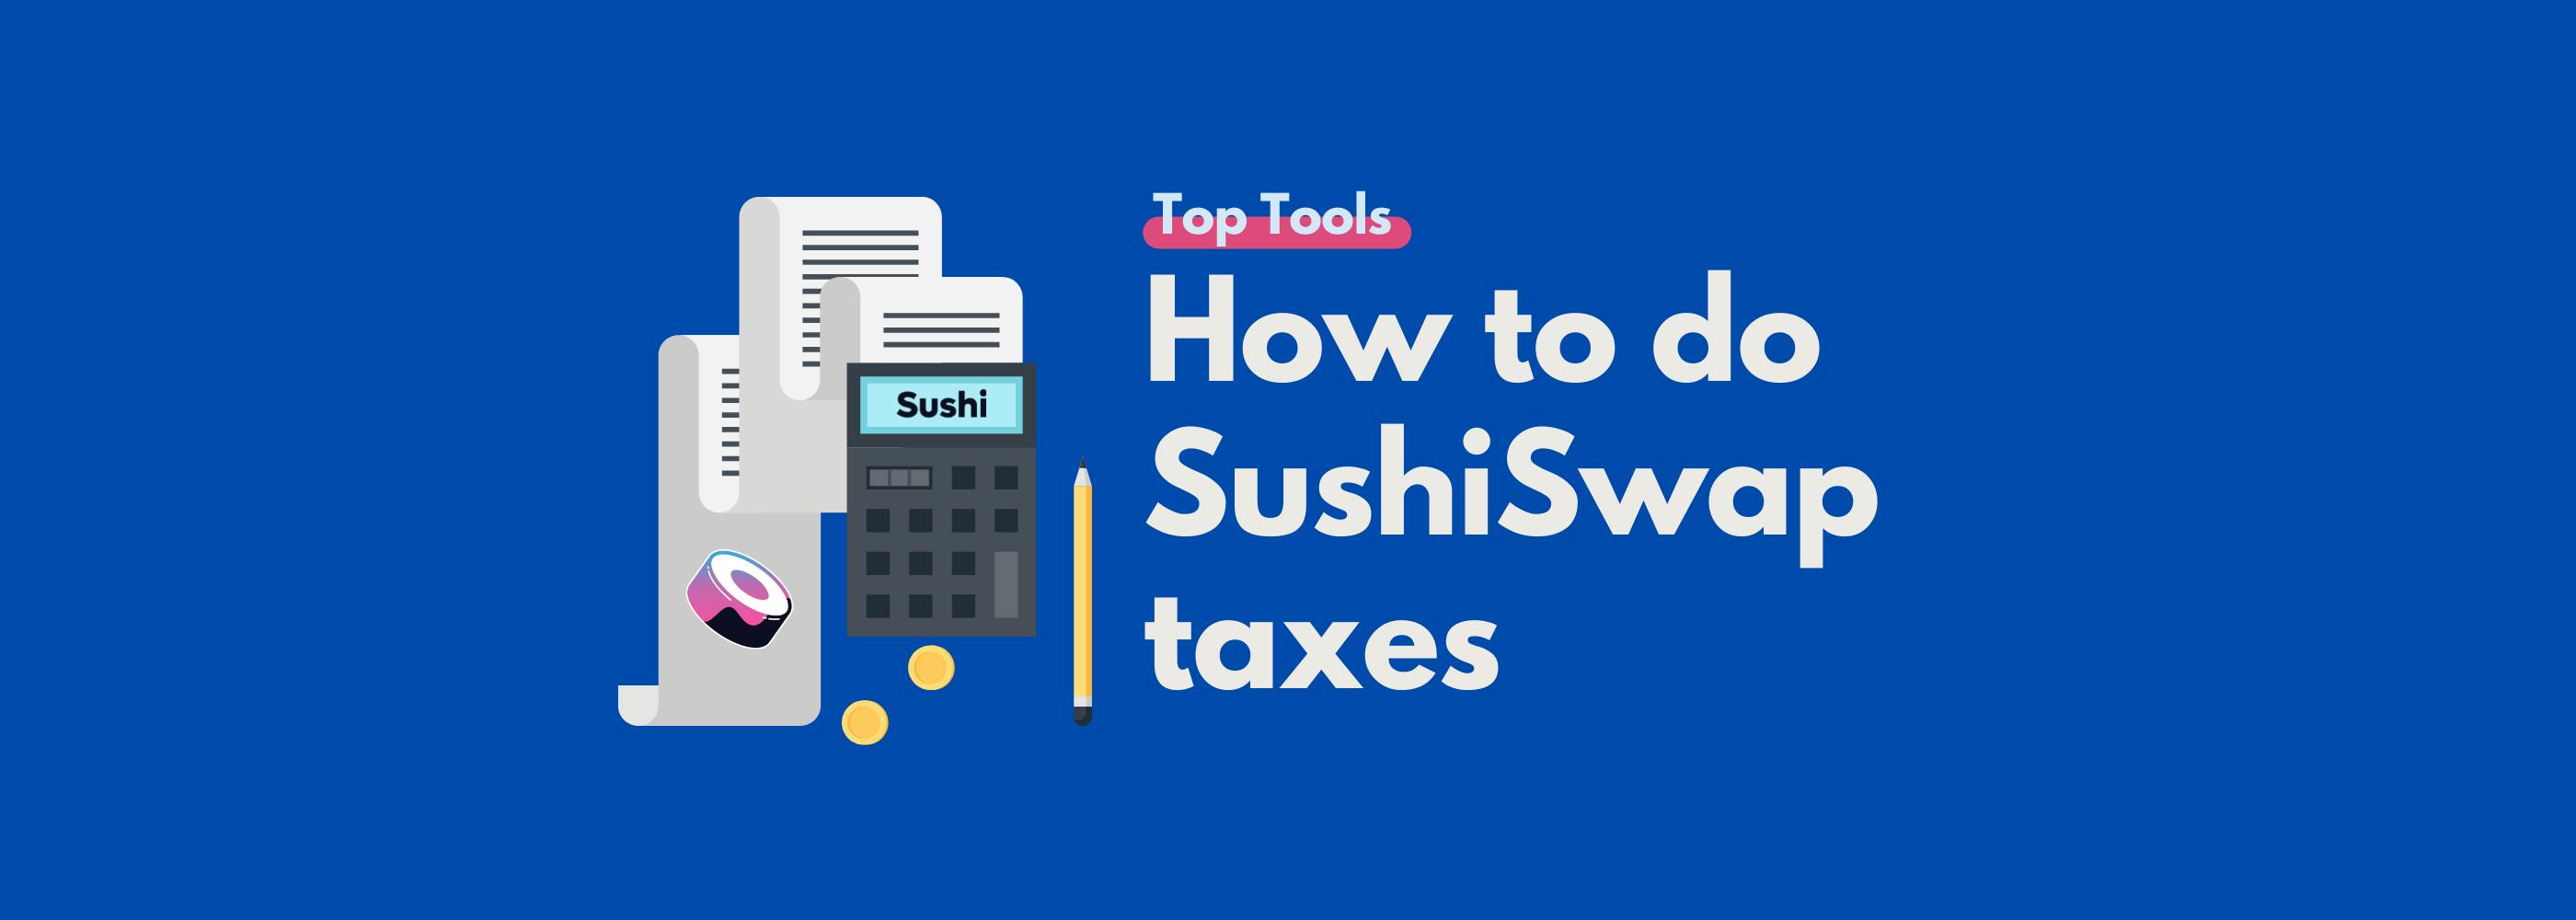 SushiSwap Taxes Guide